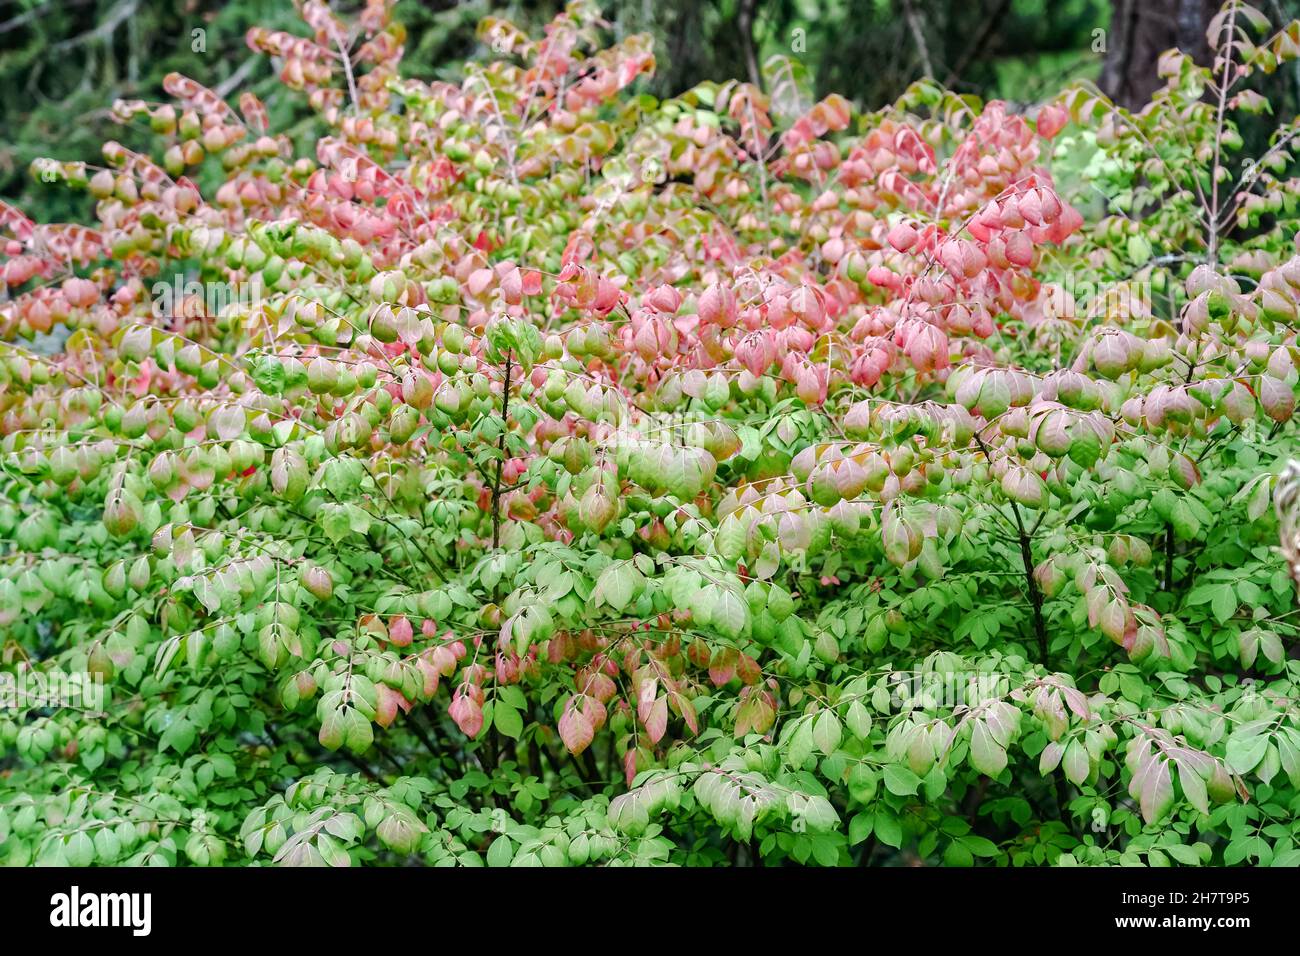 Shot of burning bush (Euonymus alatus) red and green leaves on a blurred background Stock Photo